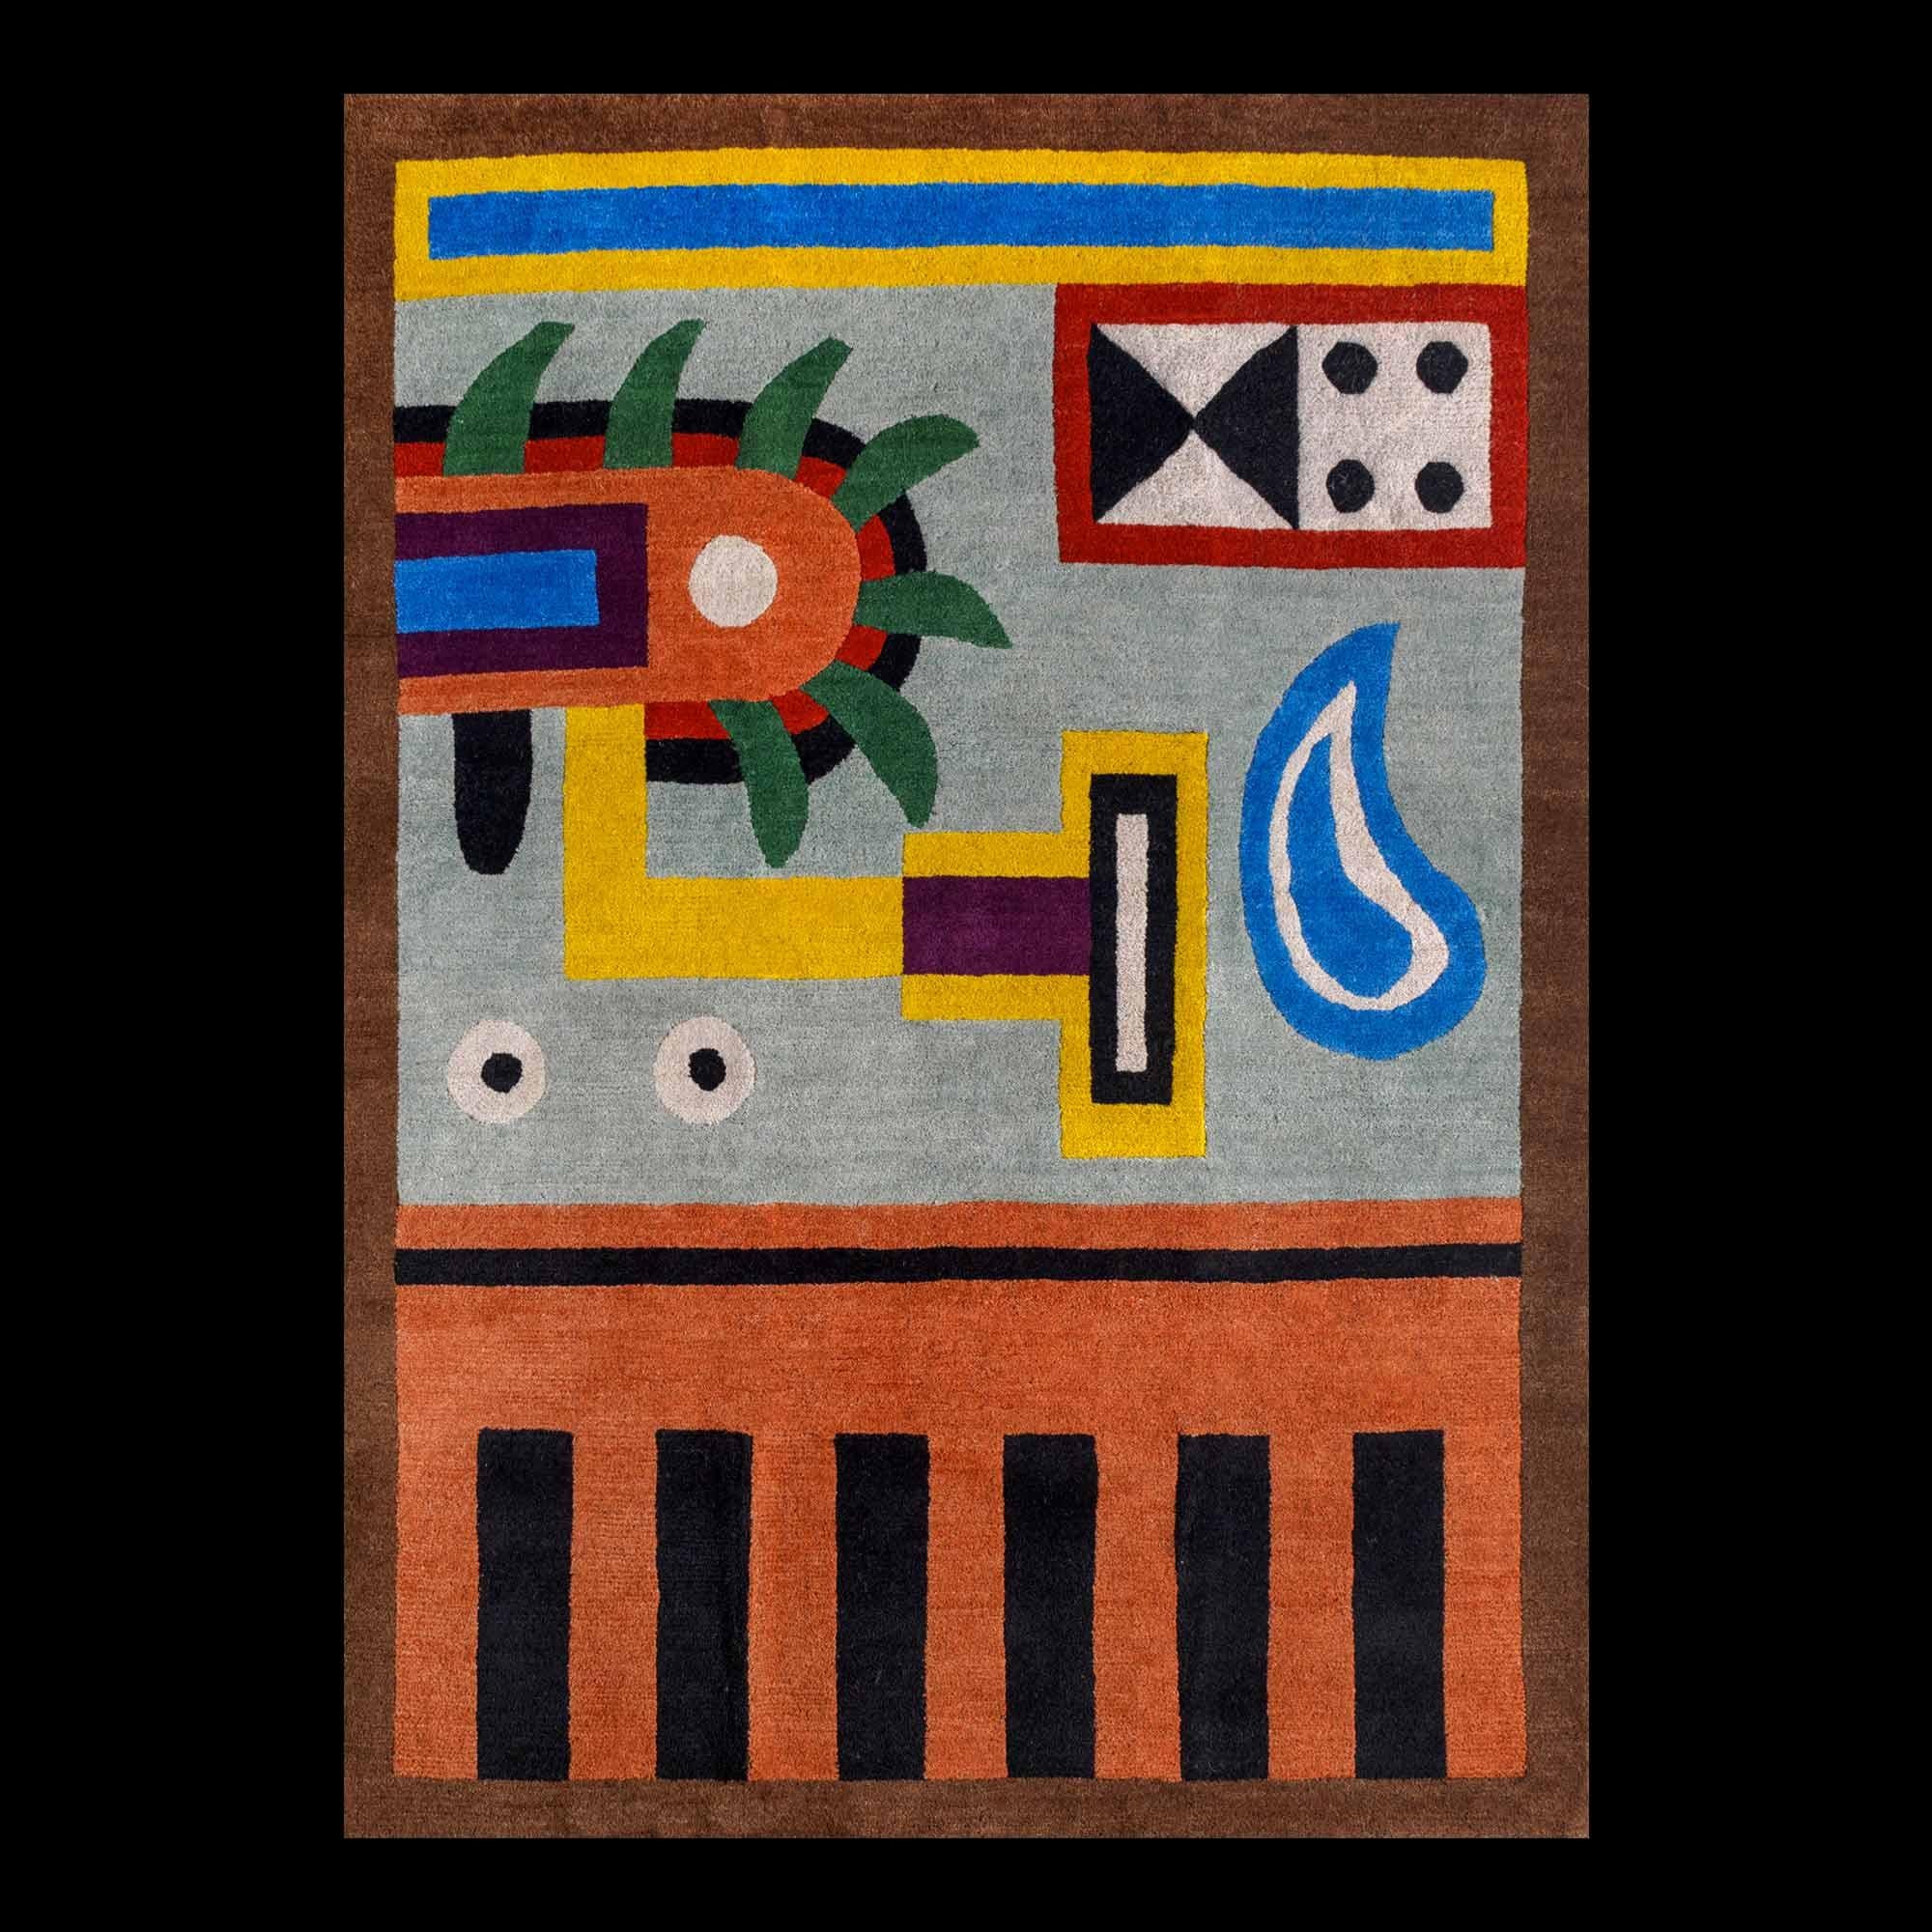 NDP49 woollen carpet by Nathalie Du Pasquier for Post Design collection/Memphis

A woollen carpet handcrafted by different Nepalese artisans. Made in a limited edition of 36 signed, numbered examples.

As the carpet is made by hand, there are